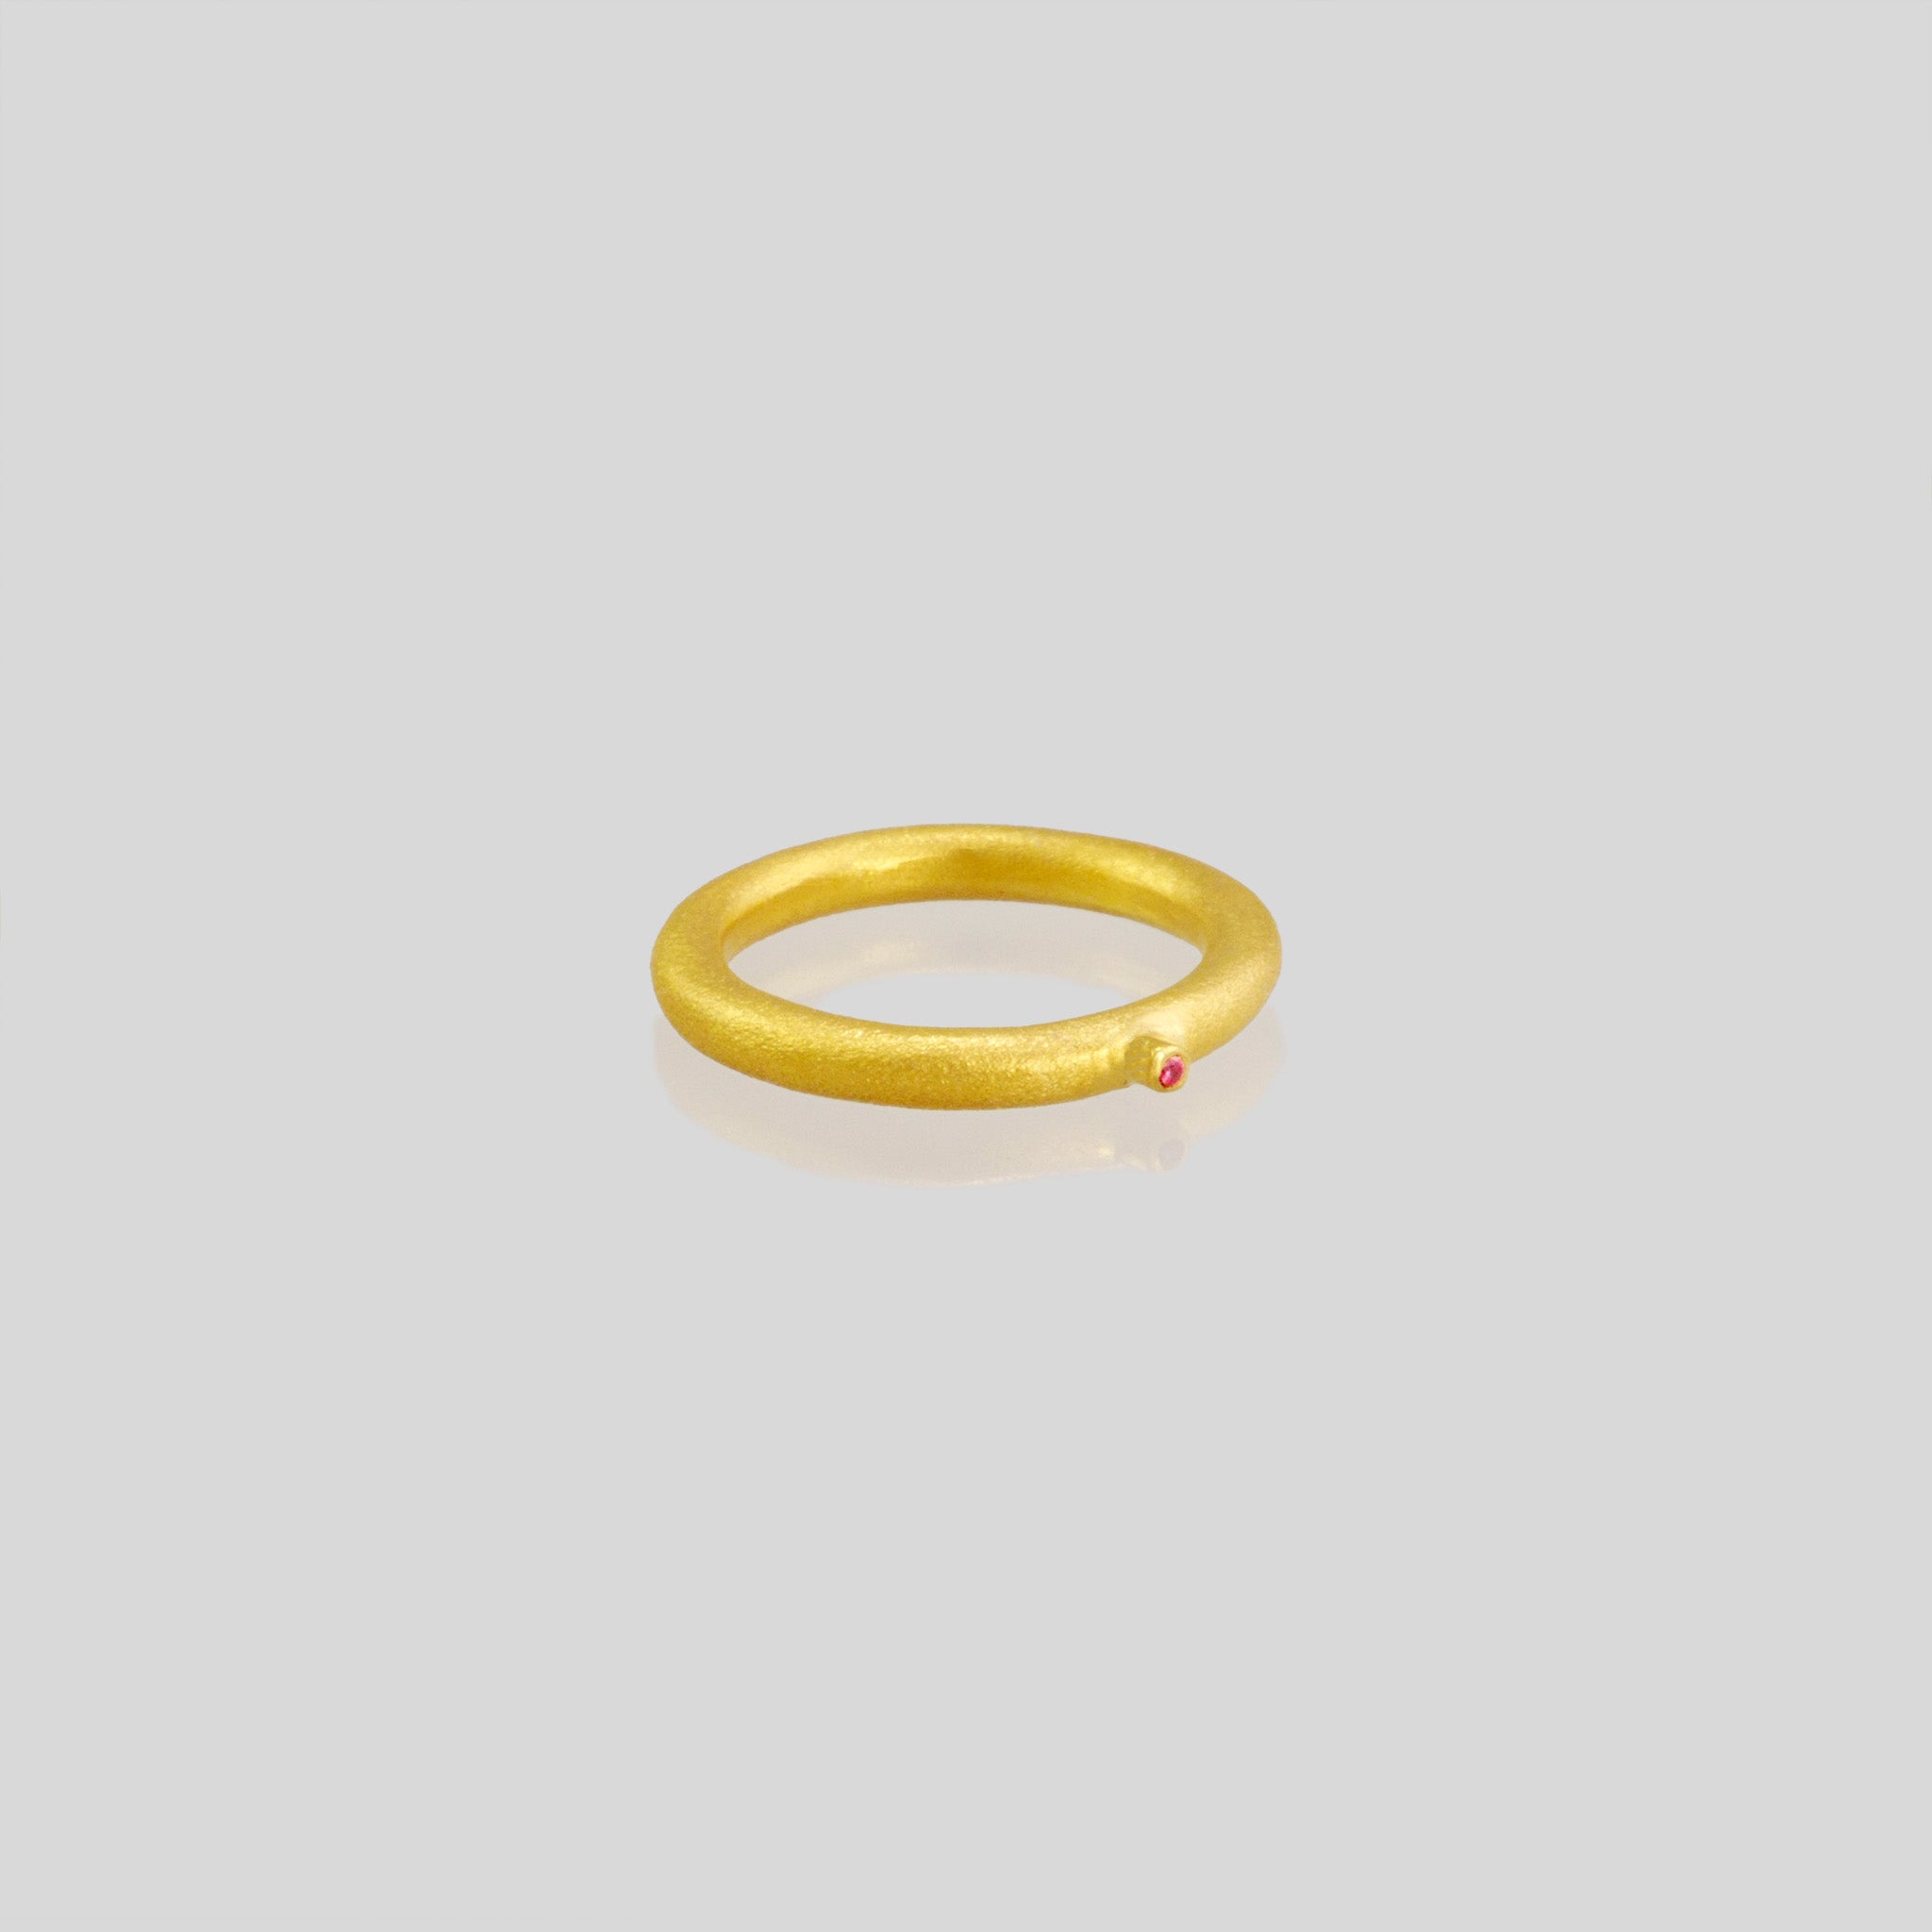 18k Gold Ring with a round matte finish and a slender tentacle extending from it, adorned with an inlaid ruby stone. Inspired by a small slug observed on the porch, the design exudes a delicate, natural charm with a playful touch.